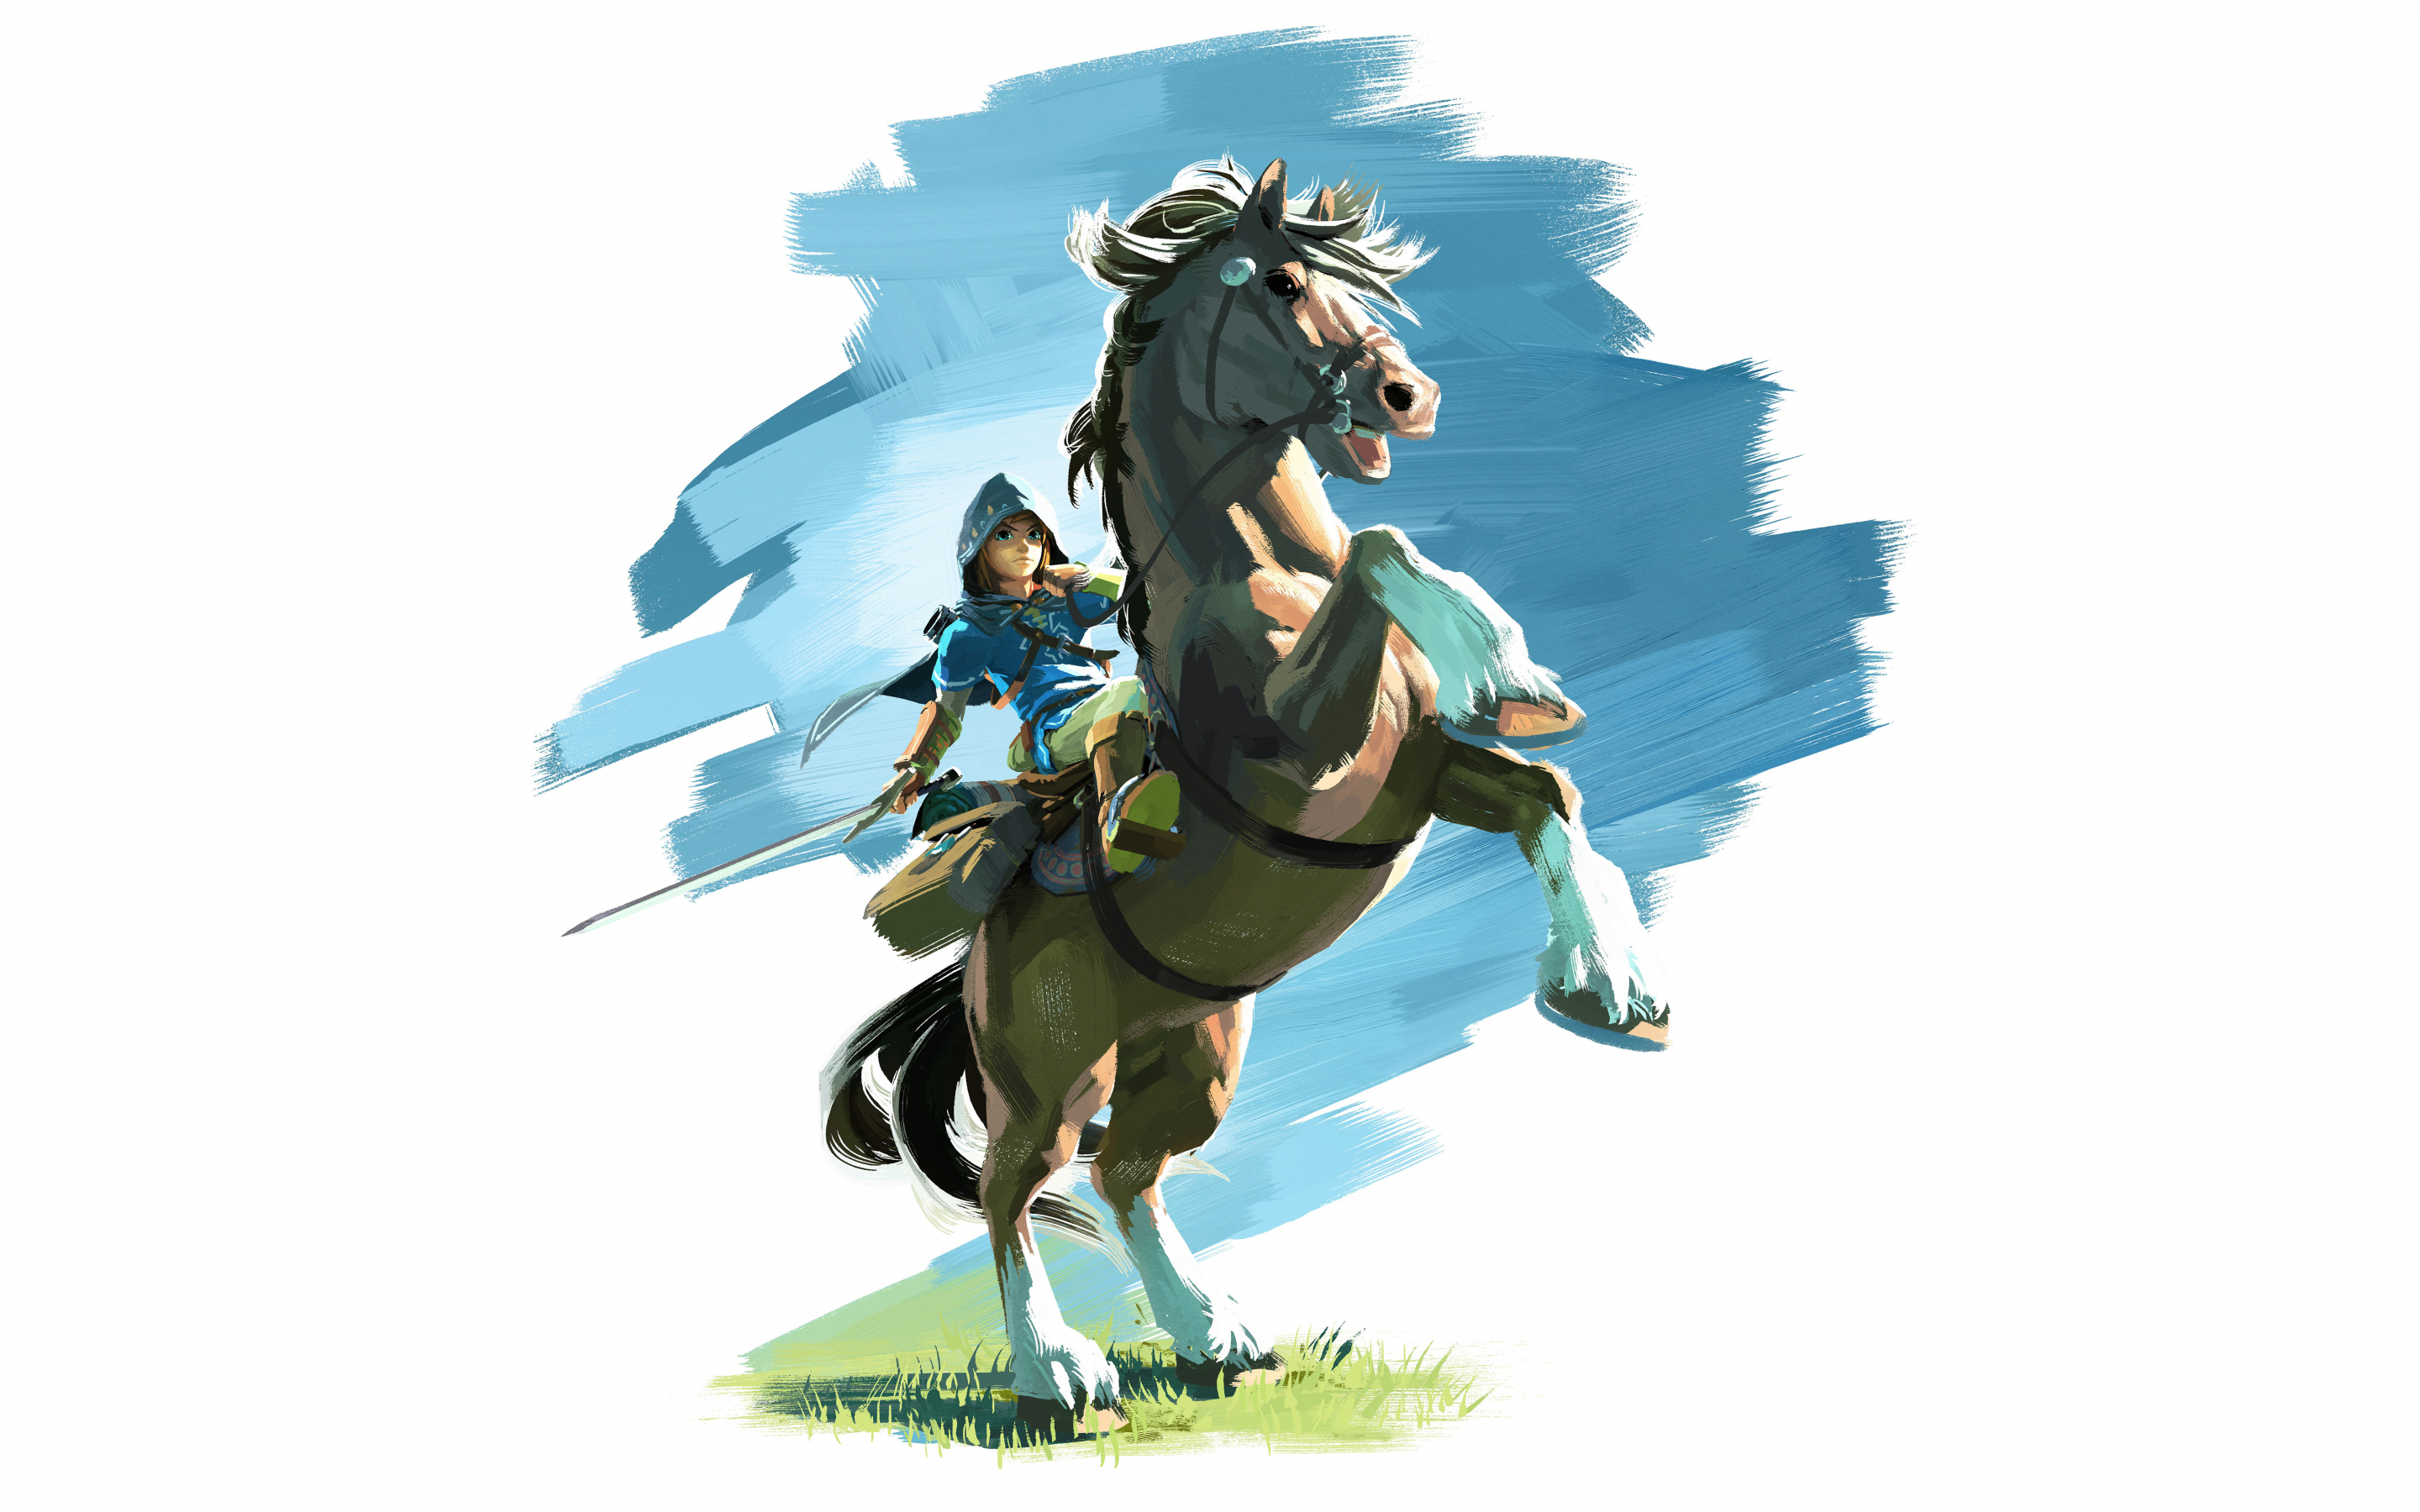 The Legend of Zelda: Breath of the Wild, video game, horse ride, 2880x1800 wallpaper